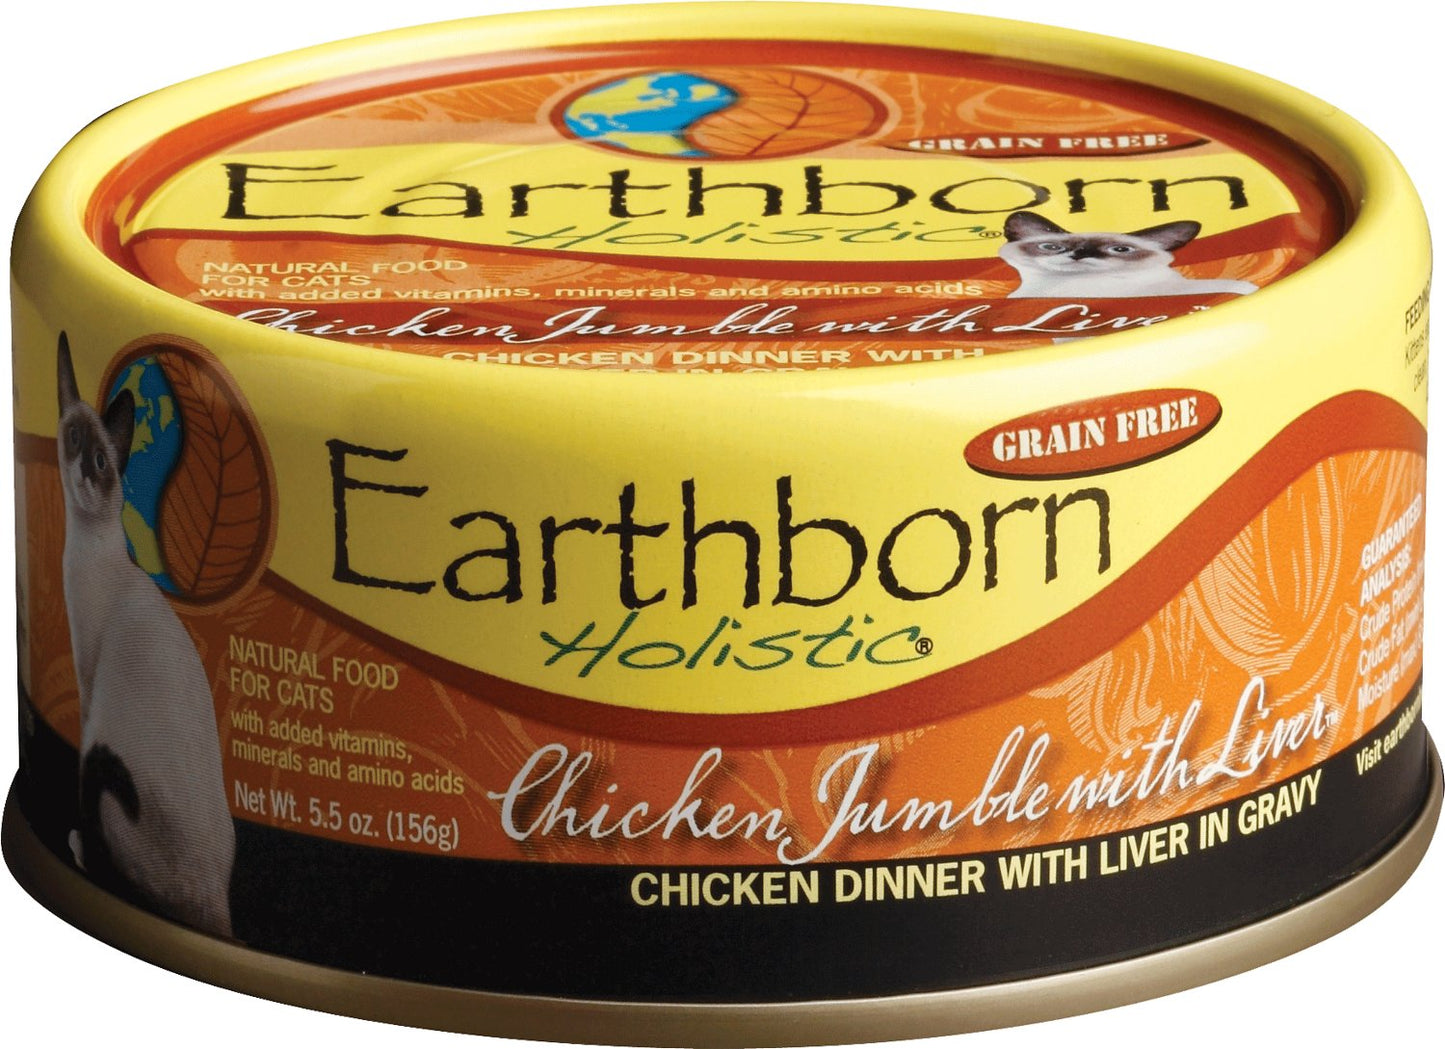 Earthborn Holistic Chicken Jumble with Liver